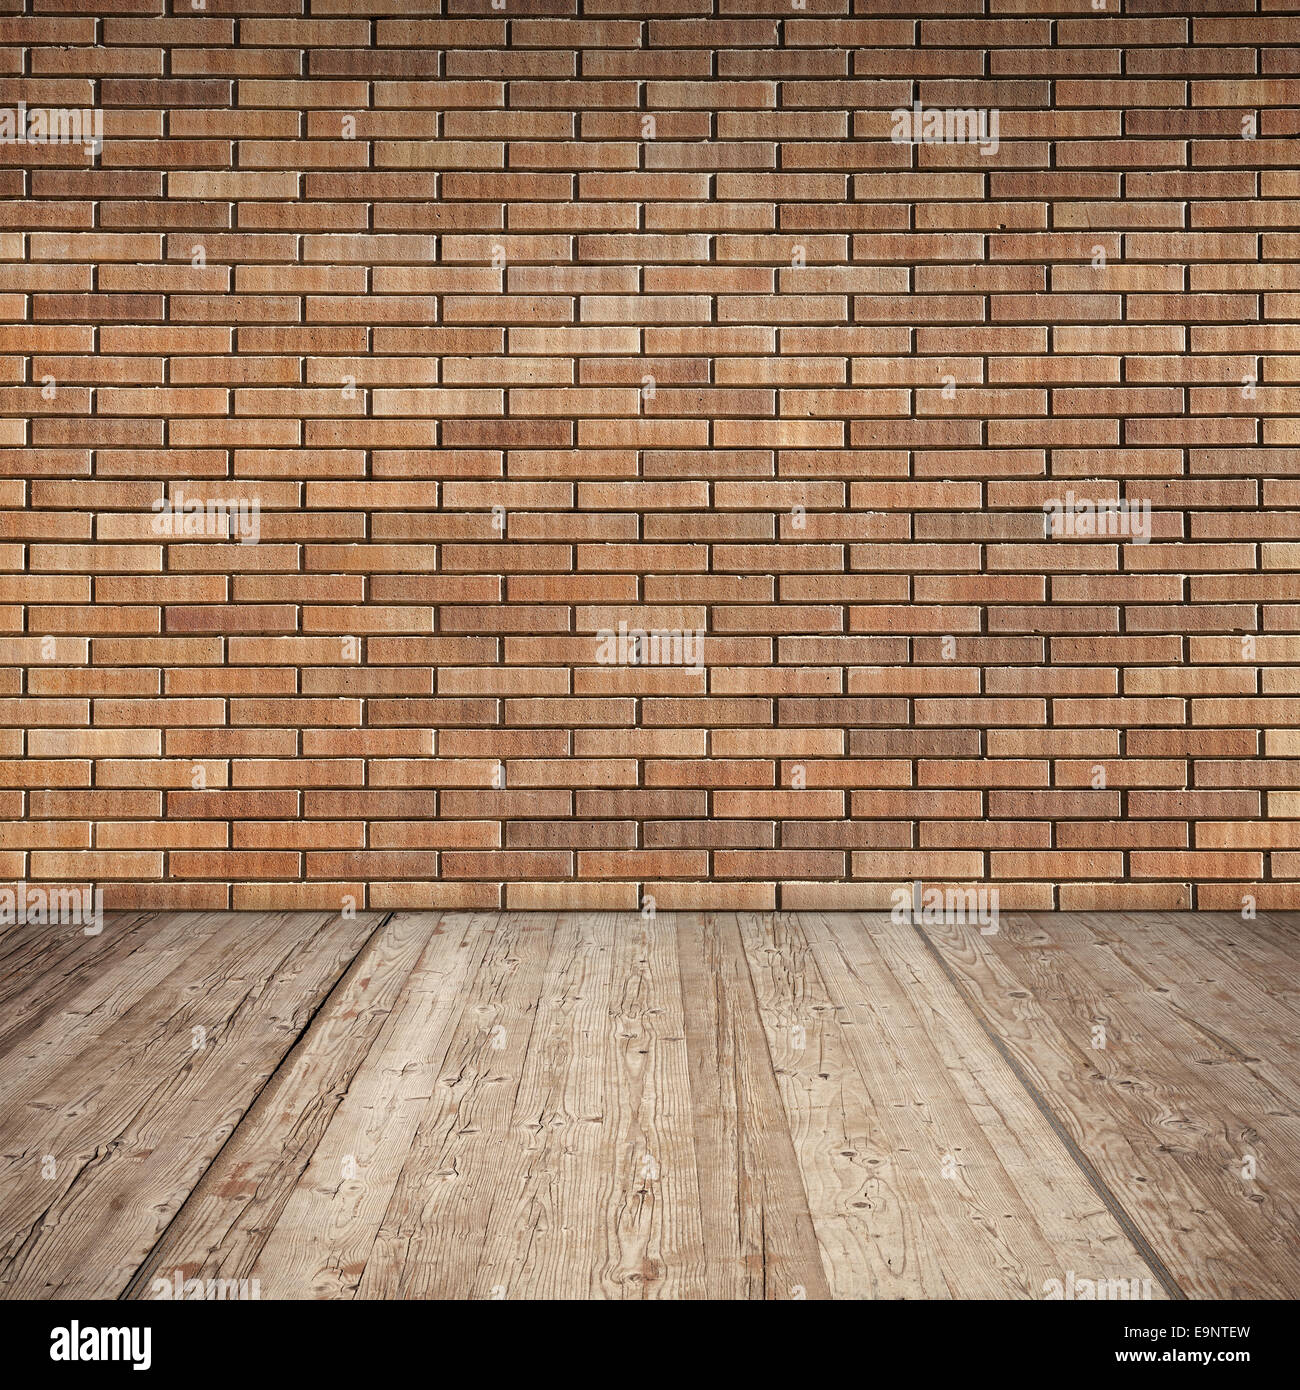 Red brick wall and wooden floor, detailed empty interior background texture Stock Photo